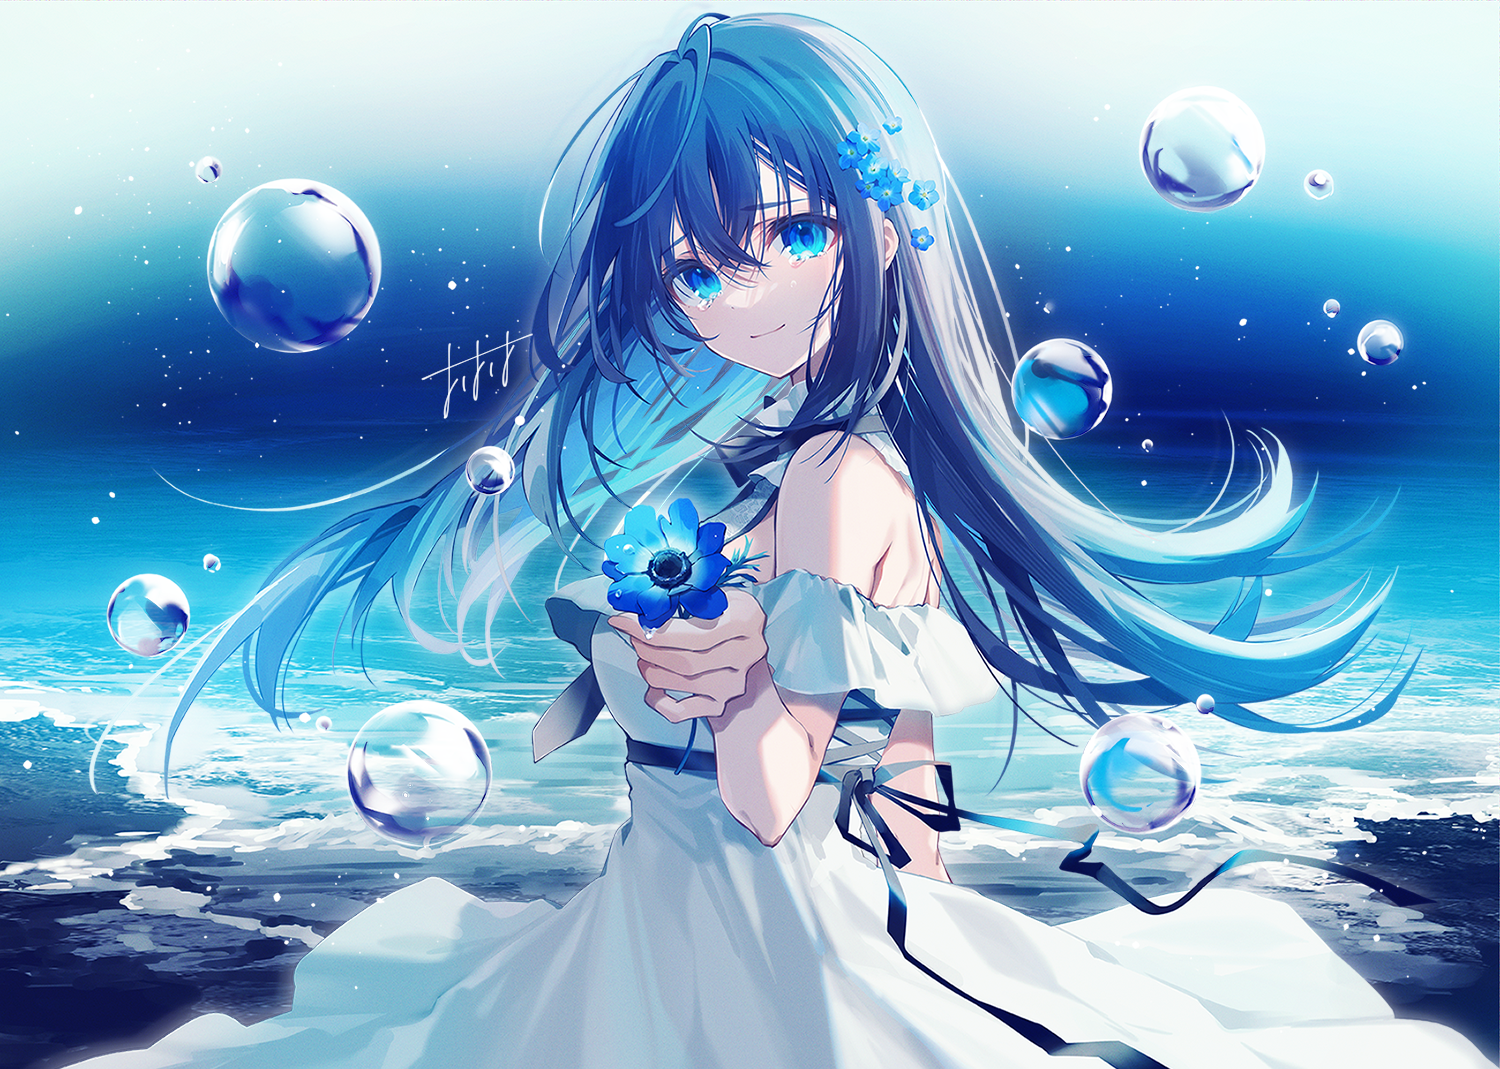 Anime Anime Girls Blue Hair Blue Eyes Water Enchantress Of The Temple Bubbles Flowers Dress Water 1500x1069